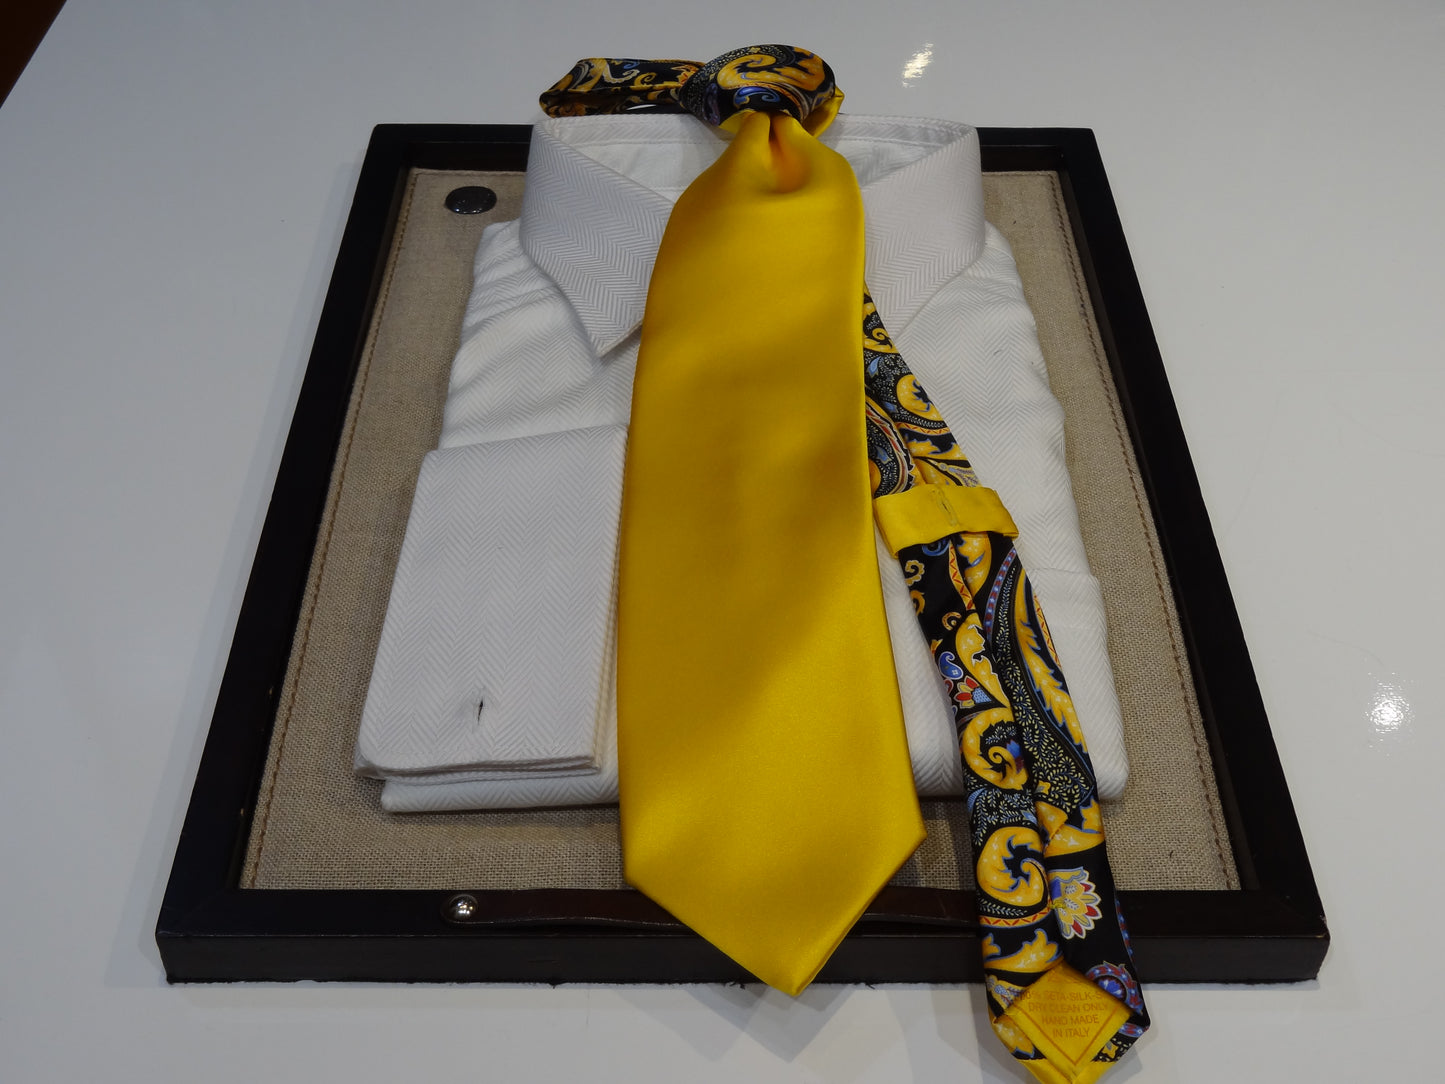 Italo Ferretti Silk Tie Contrast Knot Black Baby Blue Paisley Floral Solid Yellow